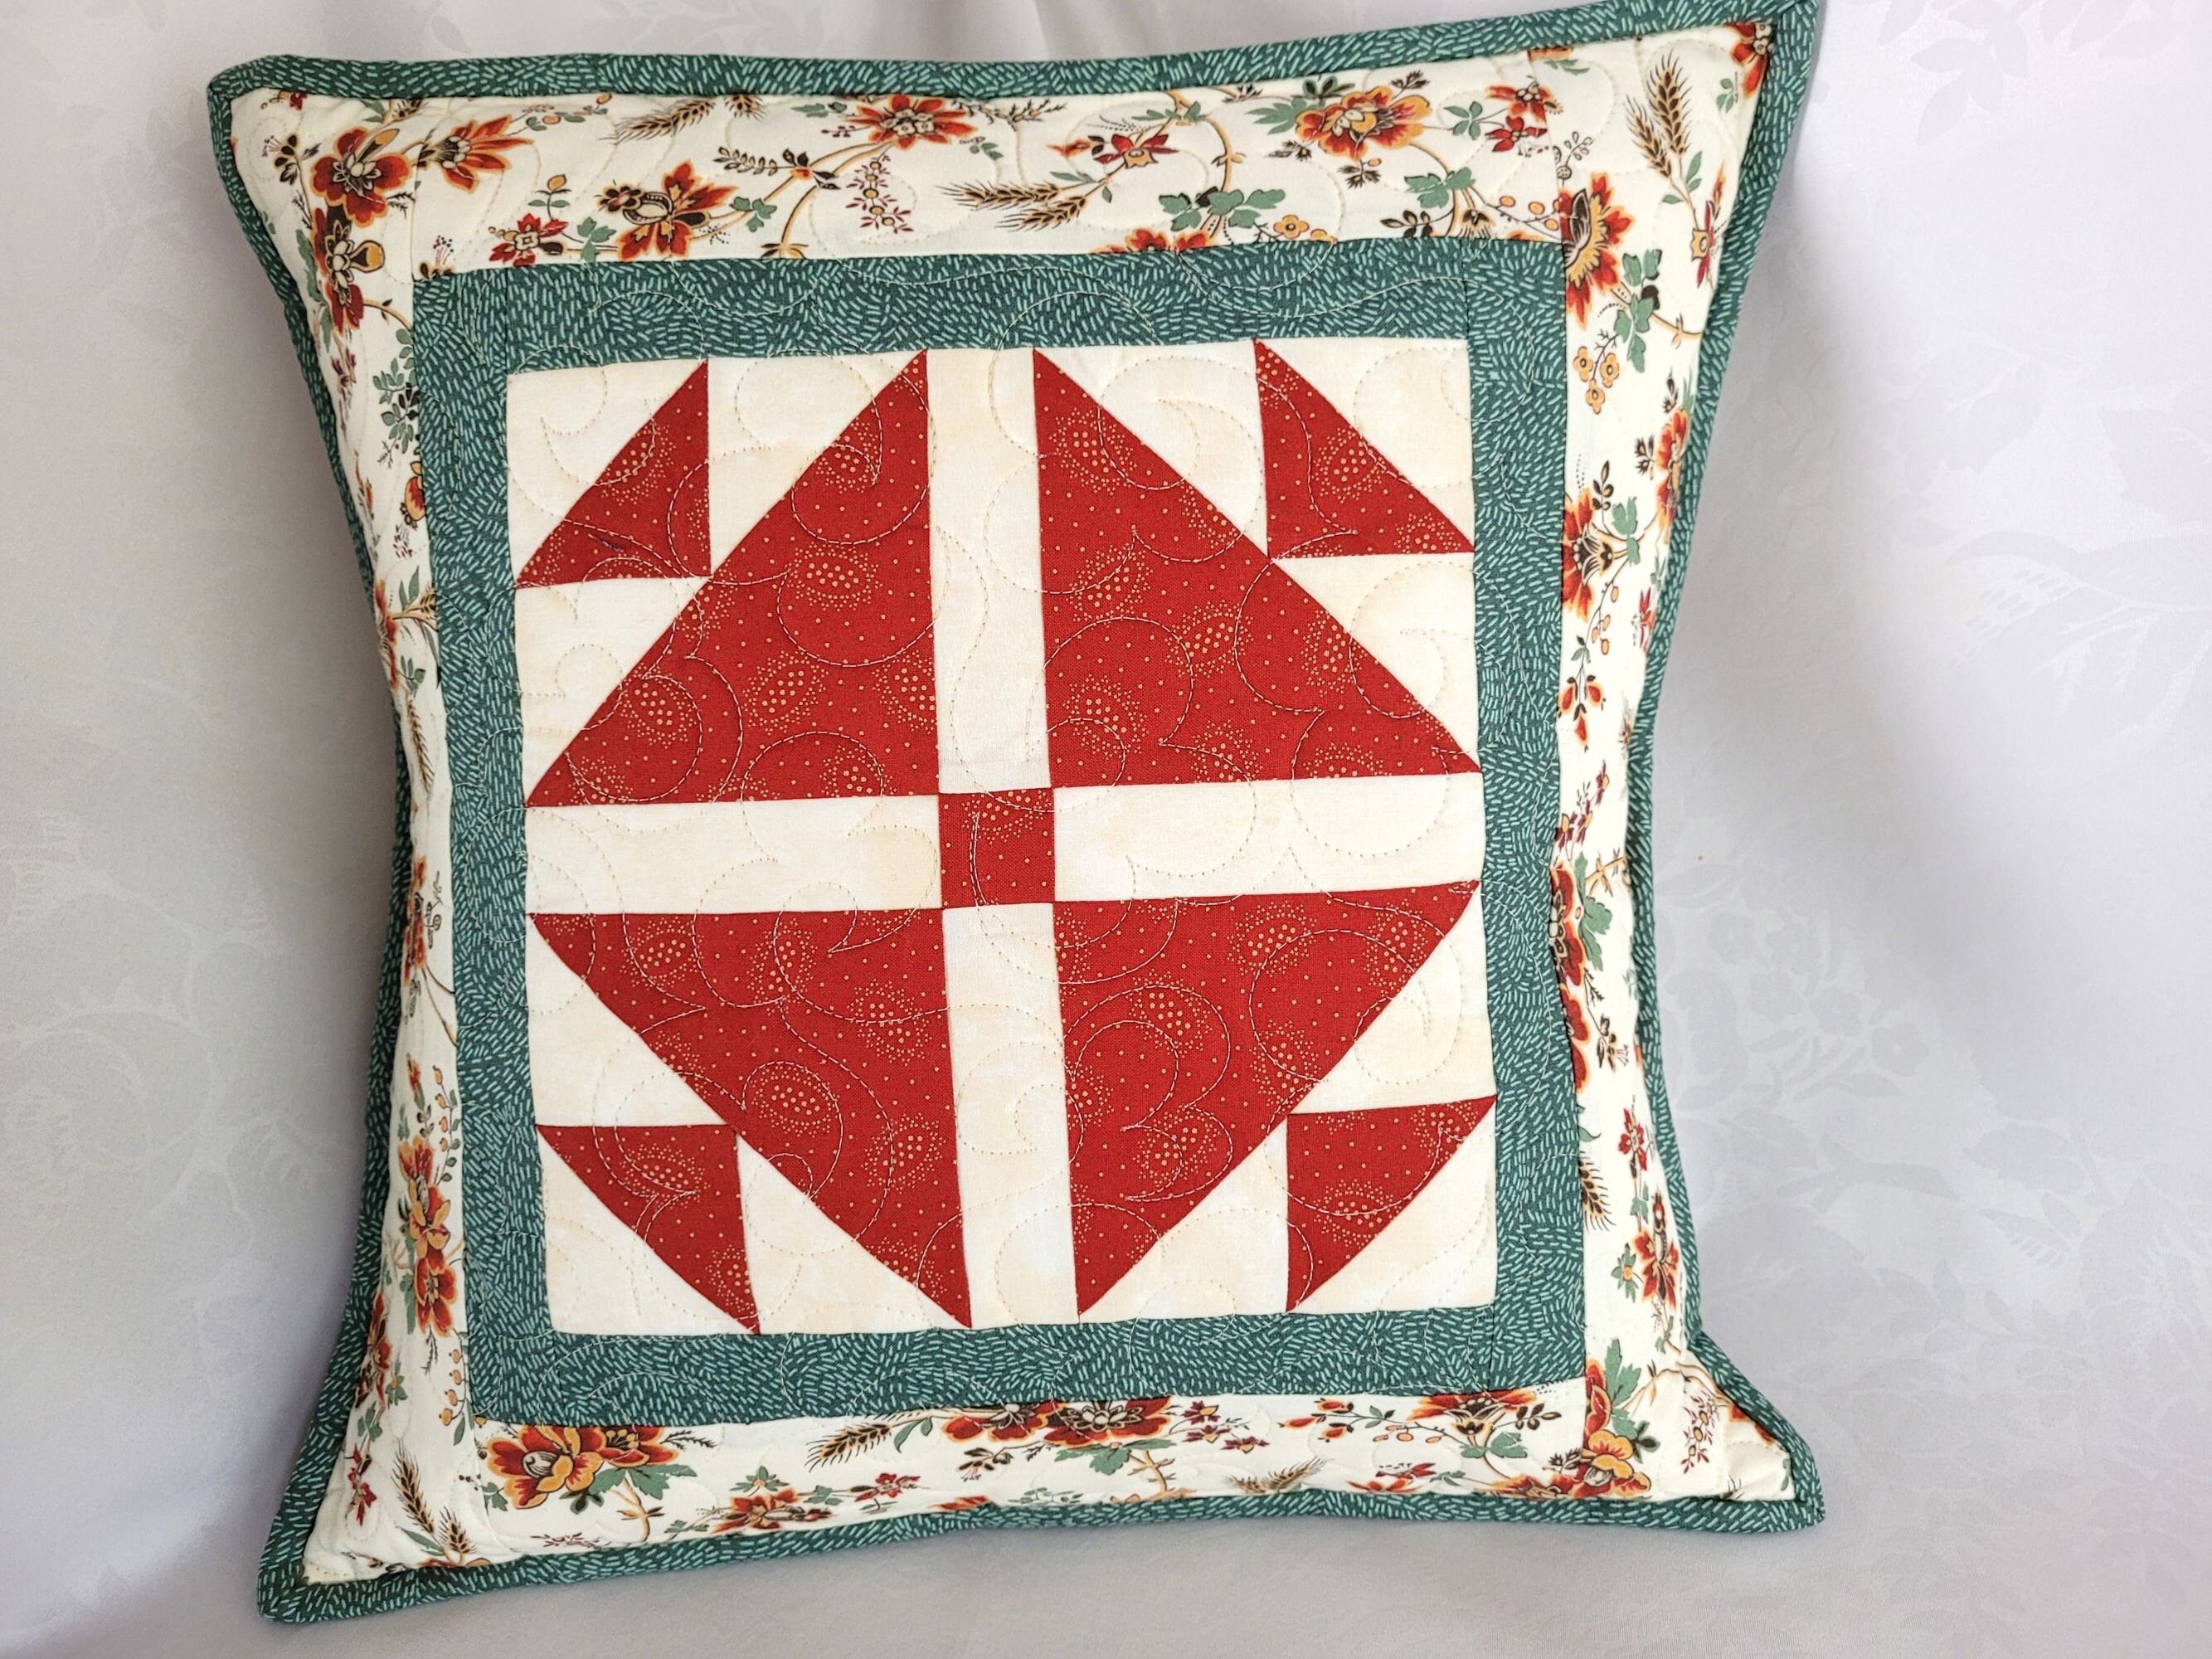 patchwork pillow in red, white and teal